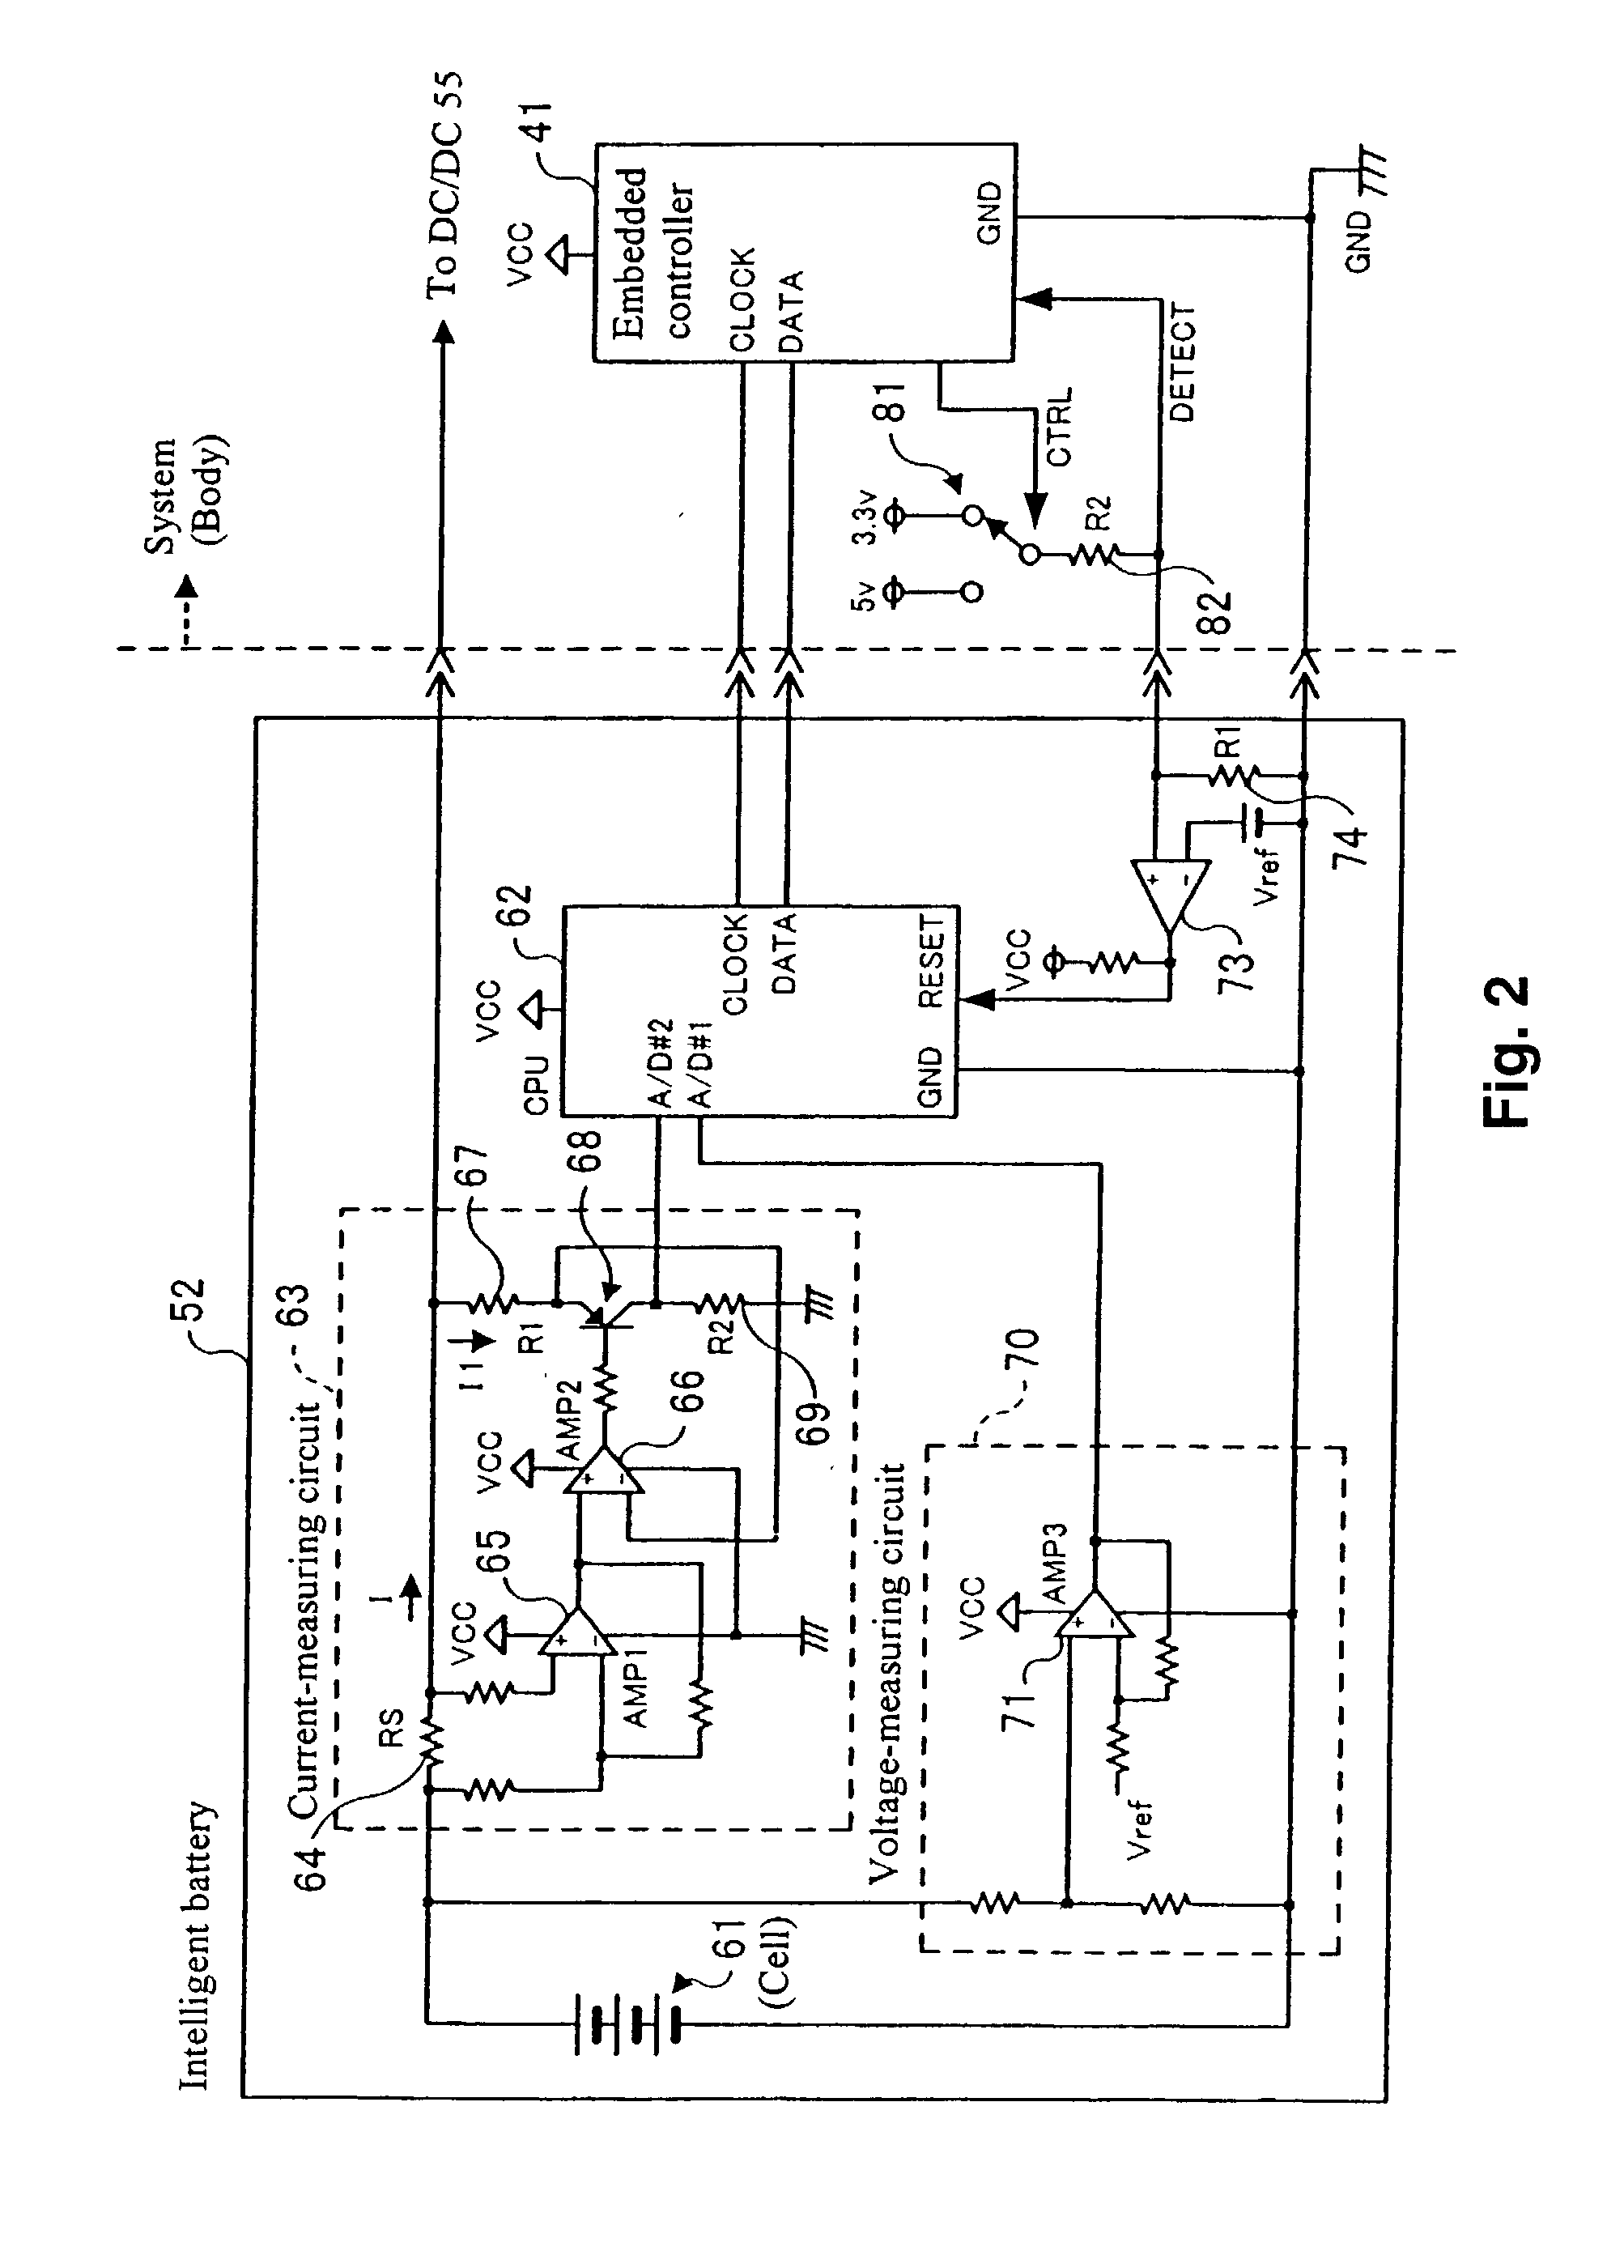 Electrical apparatus, computer equipment, intelligent battery, and control method for battery